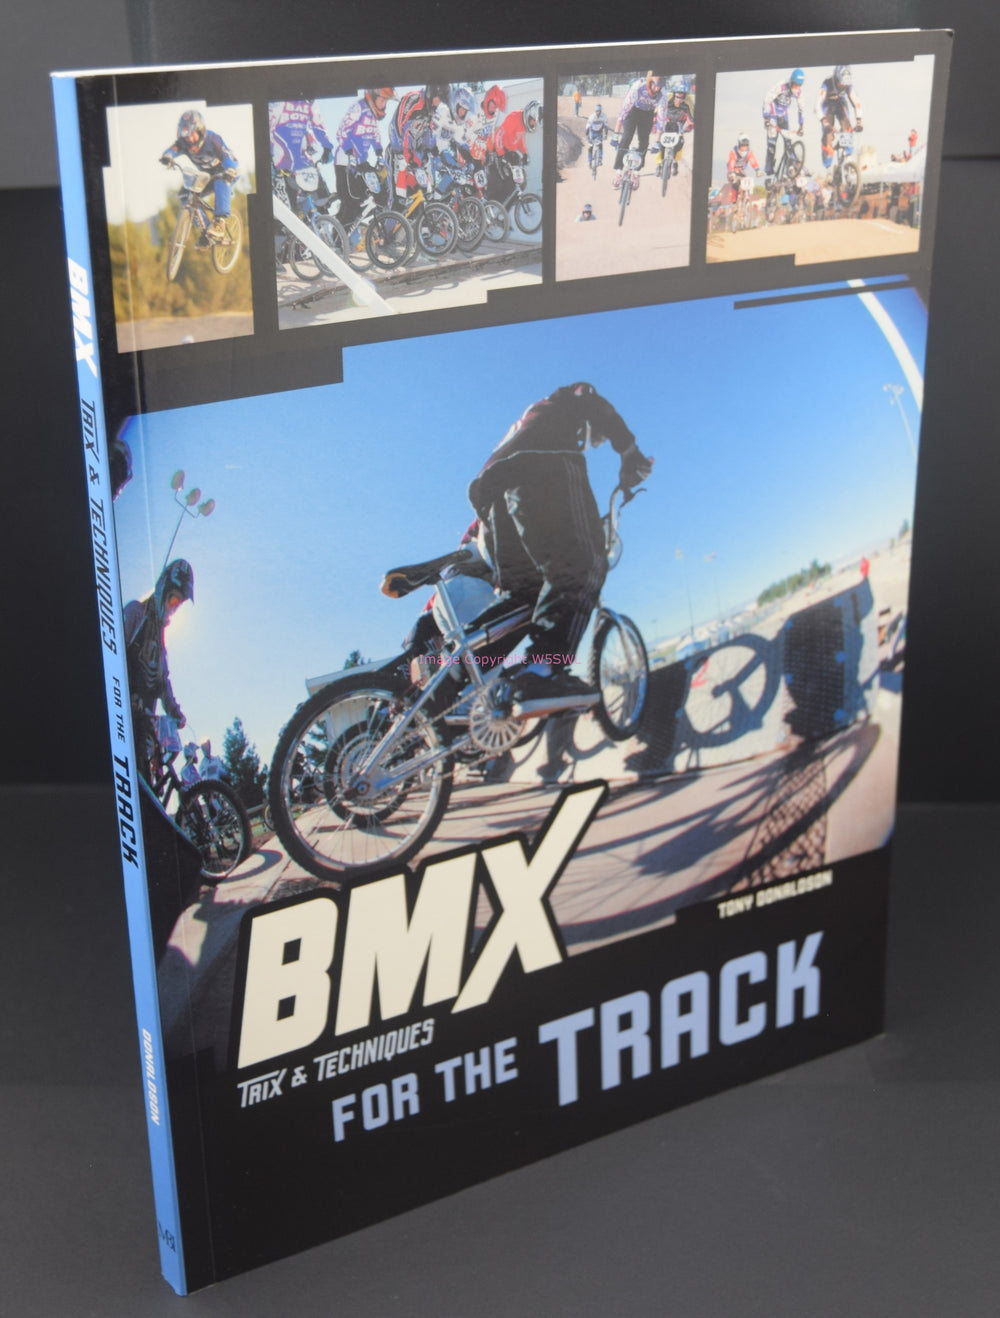 BMX Trix & Techniques For The Track - Dave's Hobby Shop by W5SWL